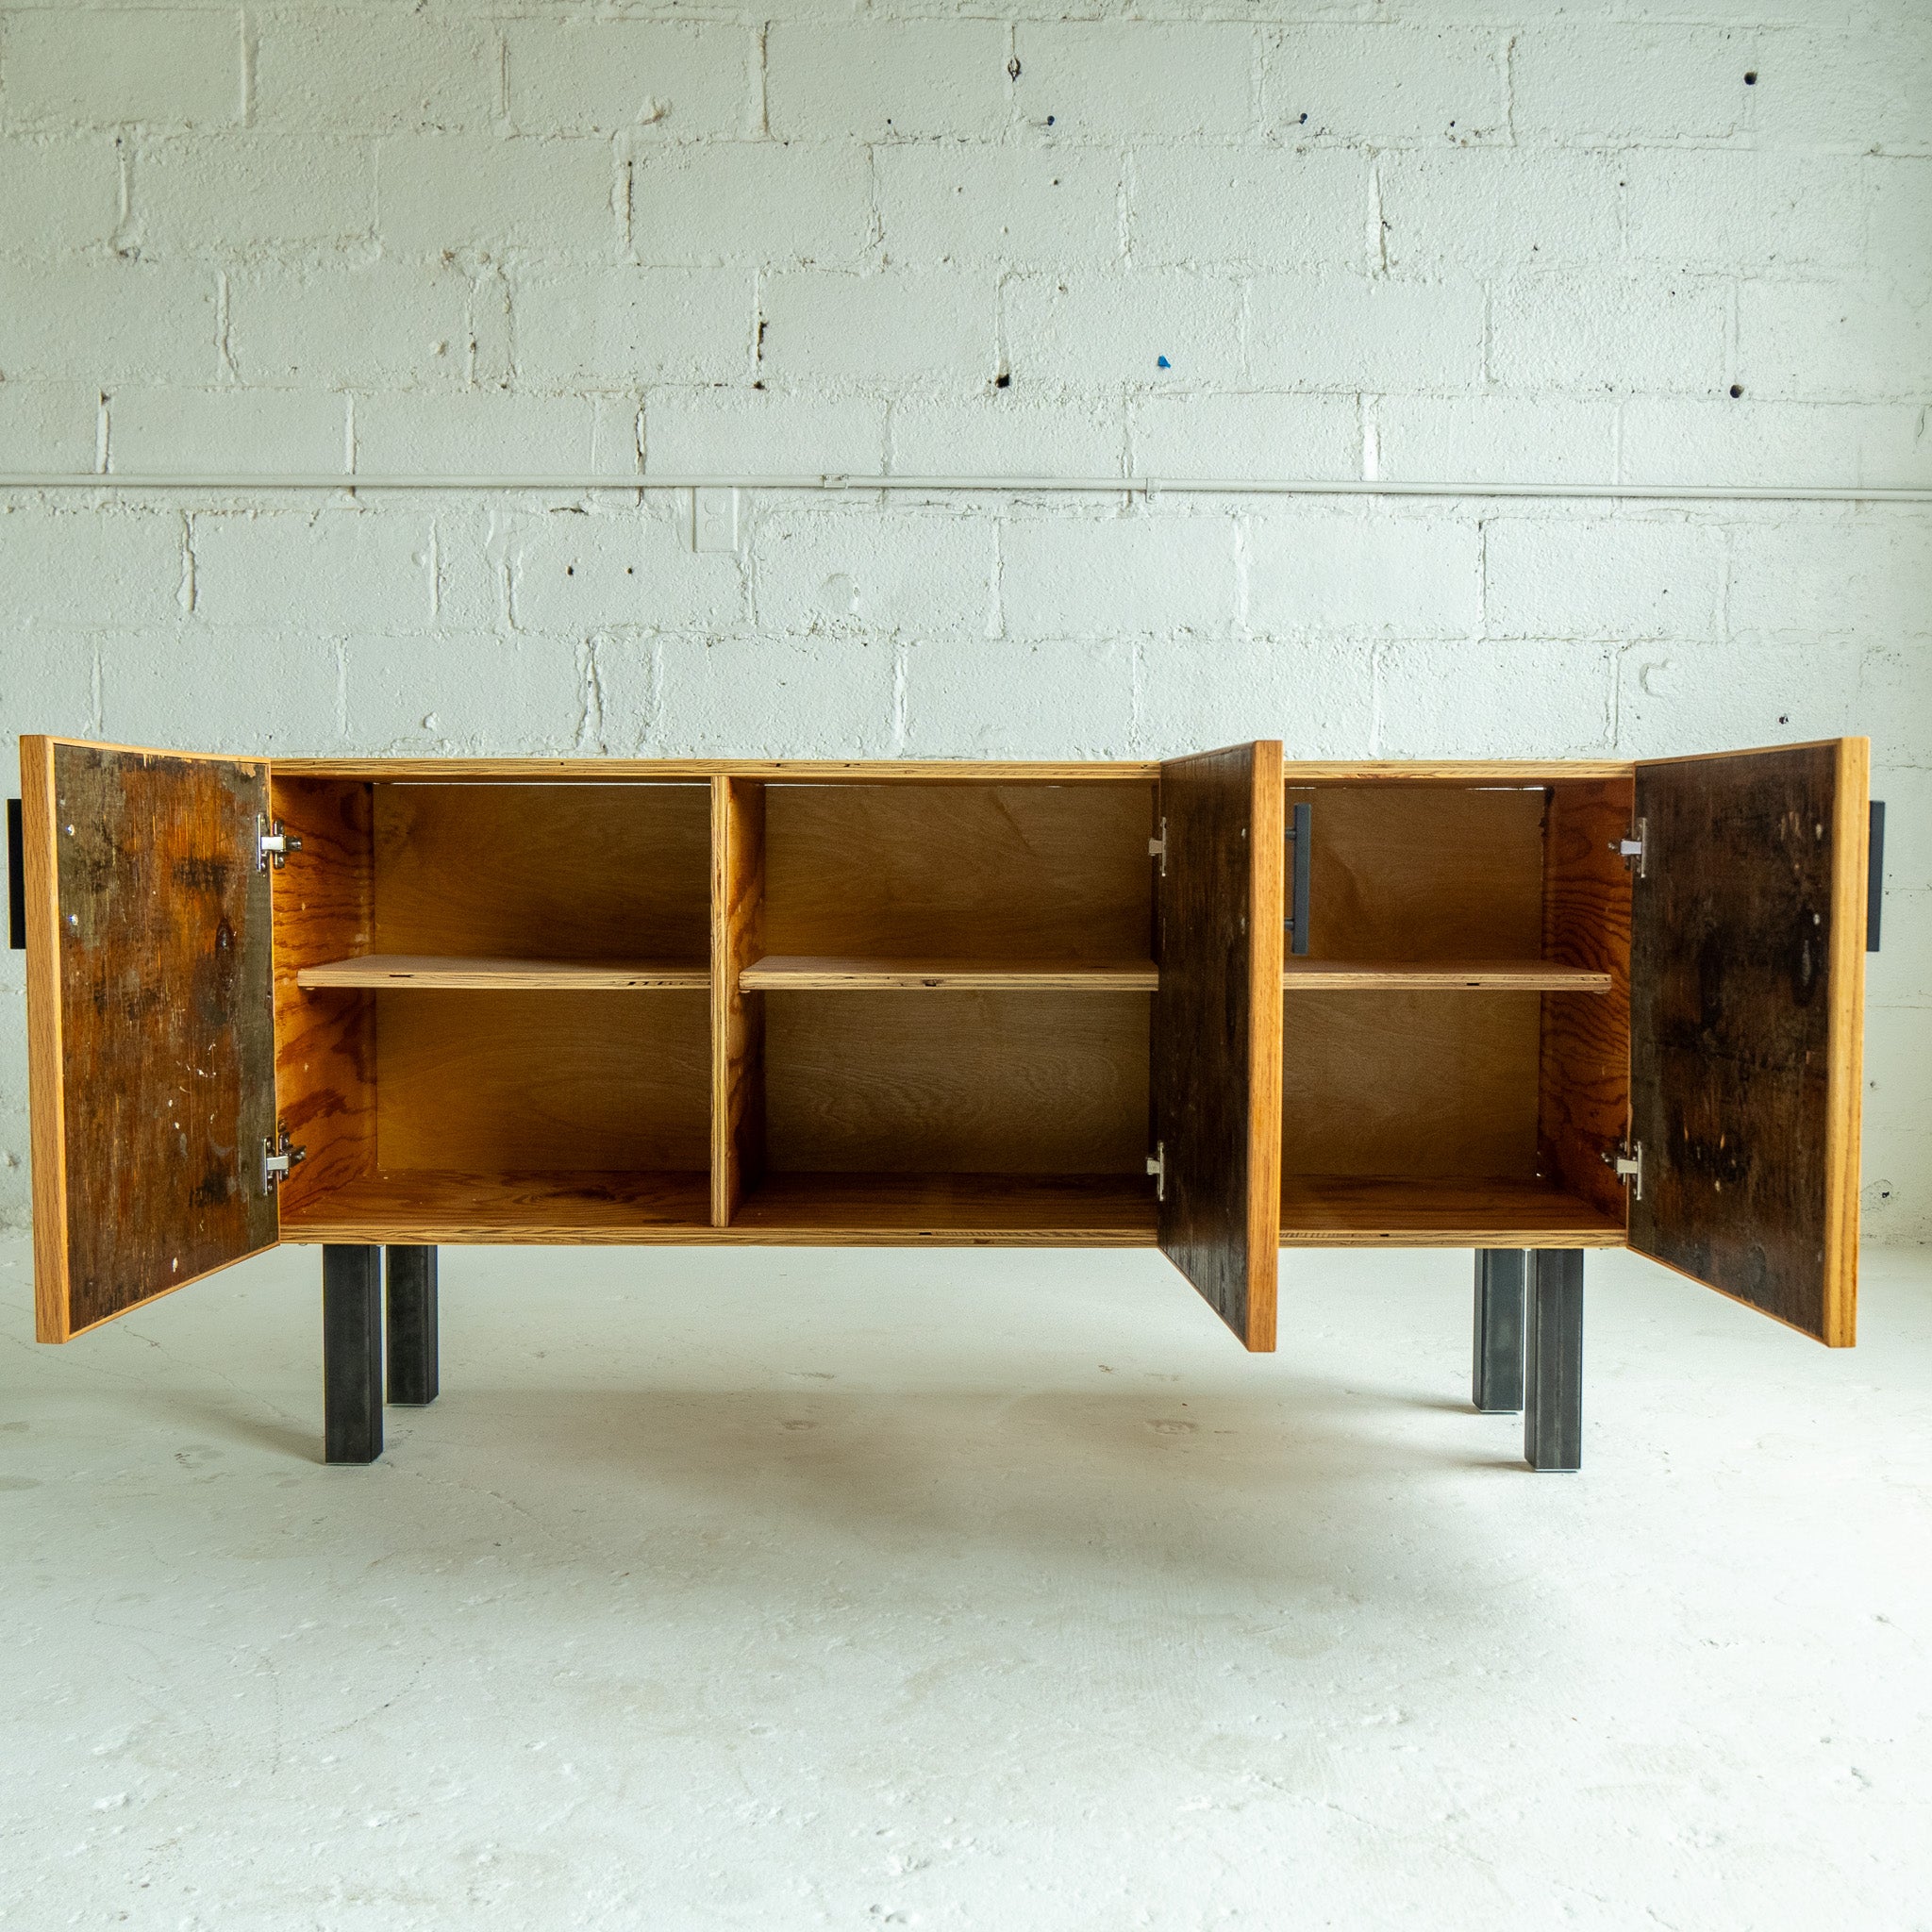 Hamm's credenza 2 inside view reclaimed wood